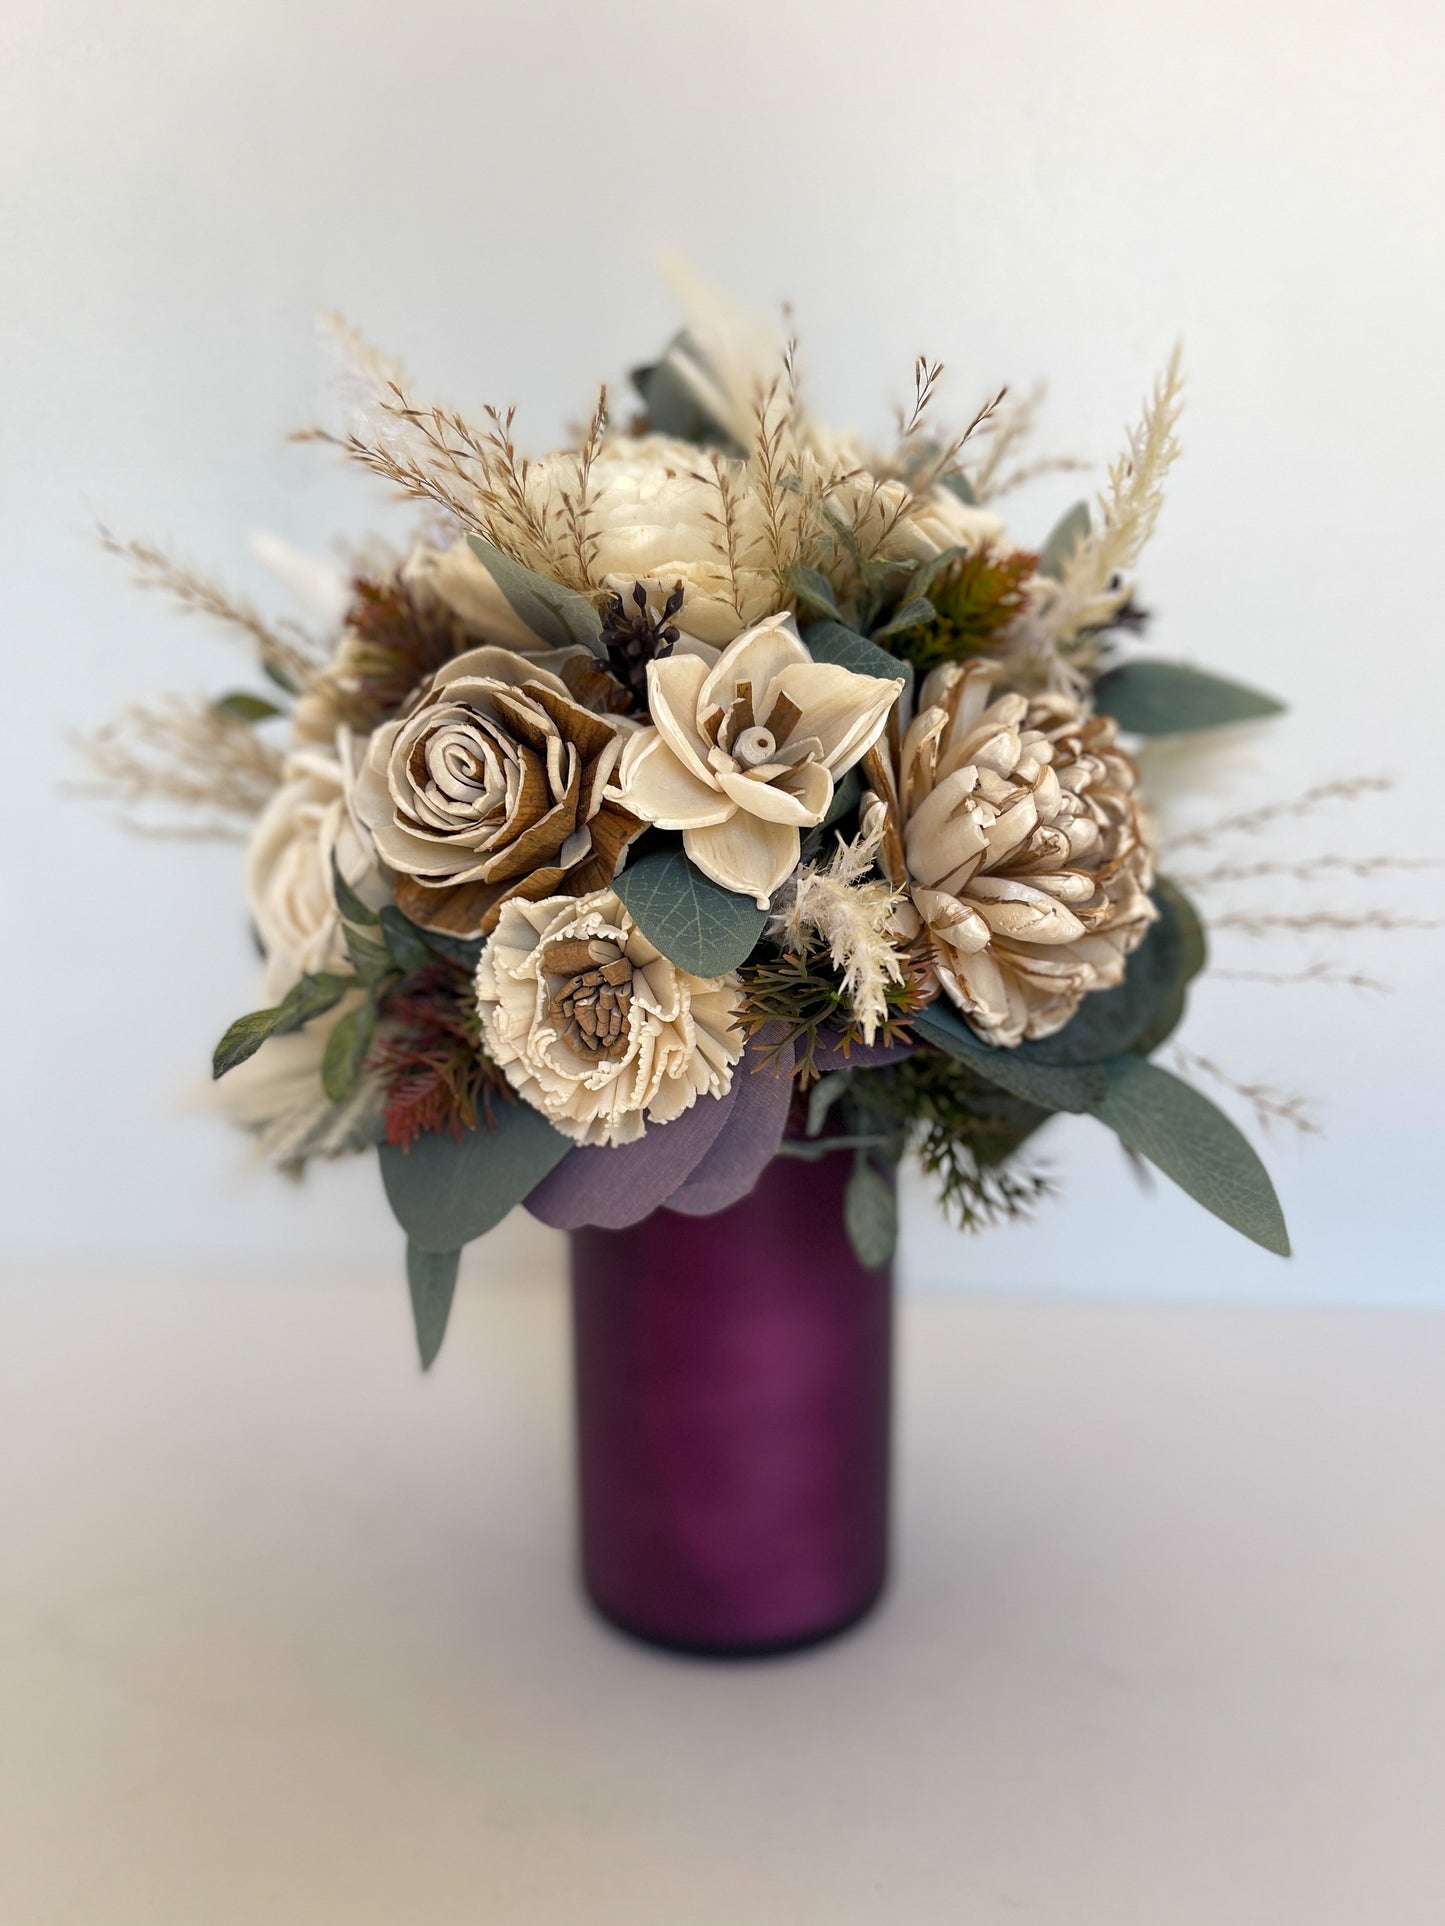 Candle Bouquet - Plum, Bark and Ivory